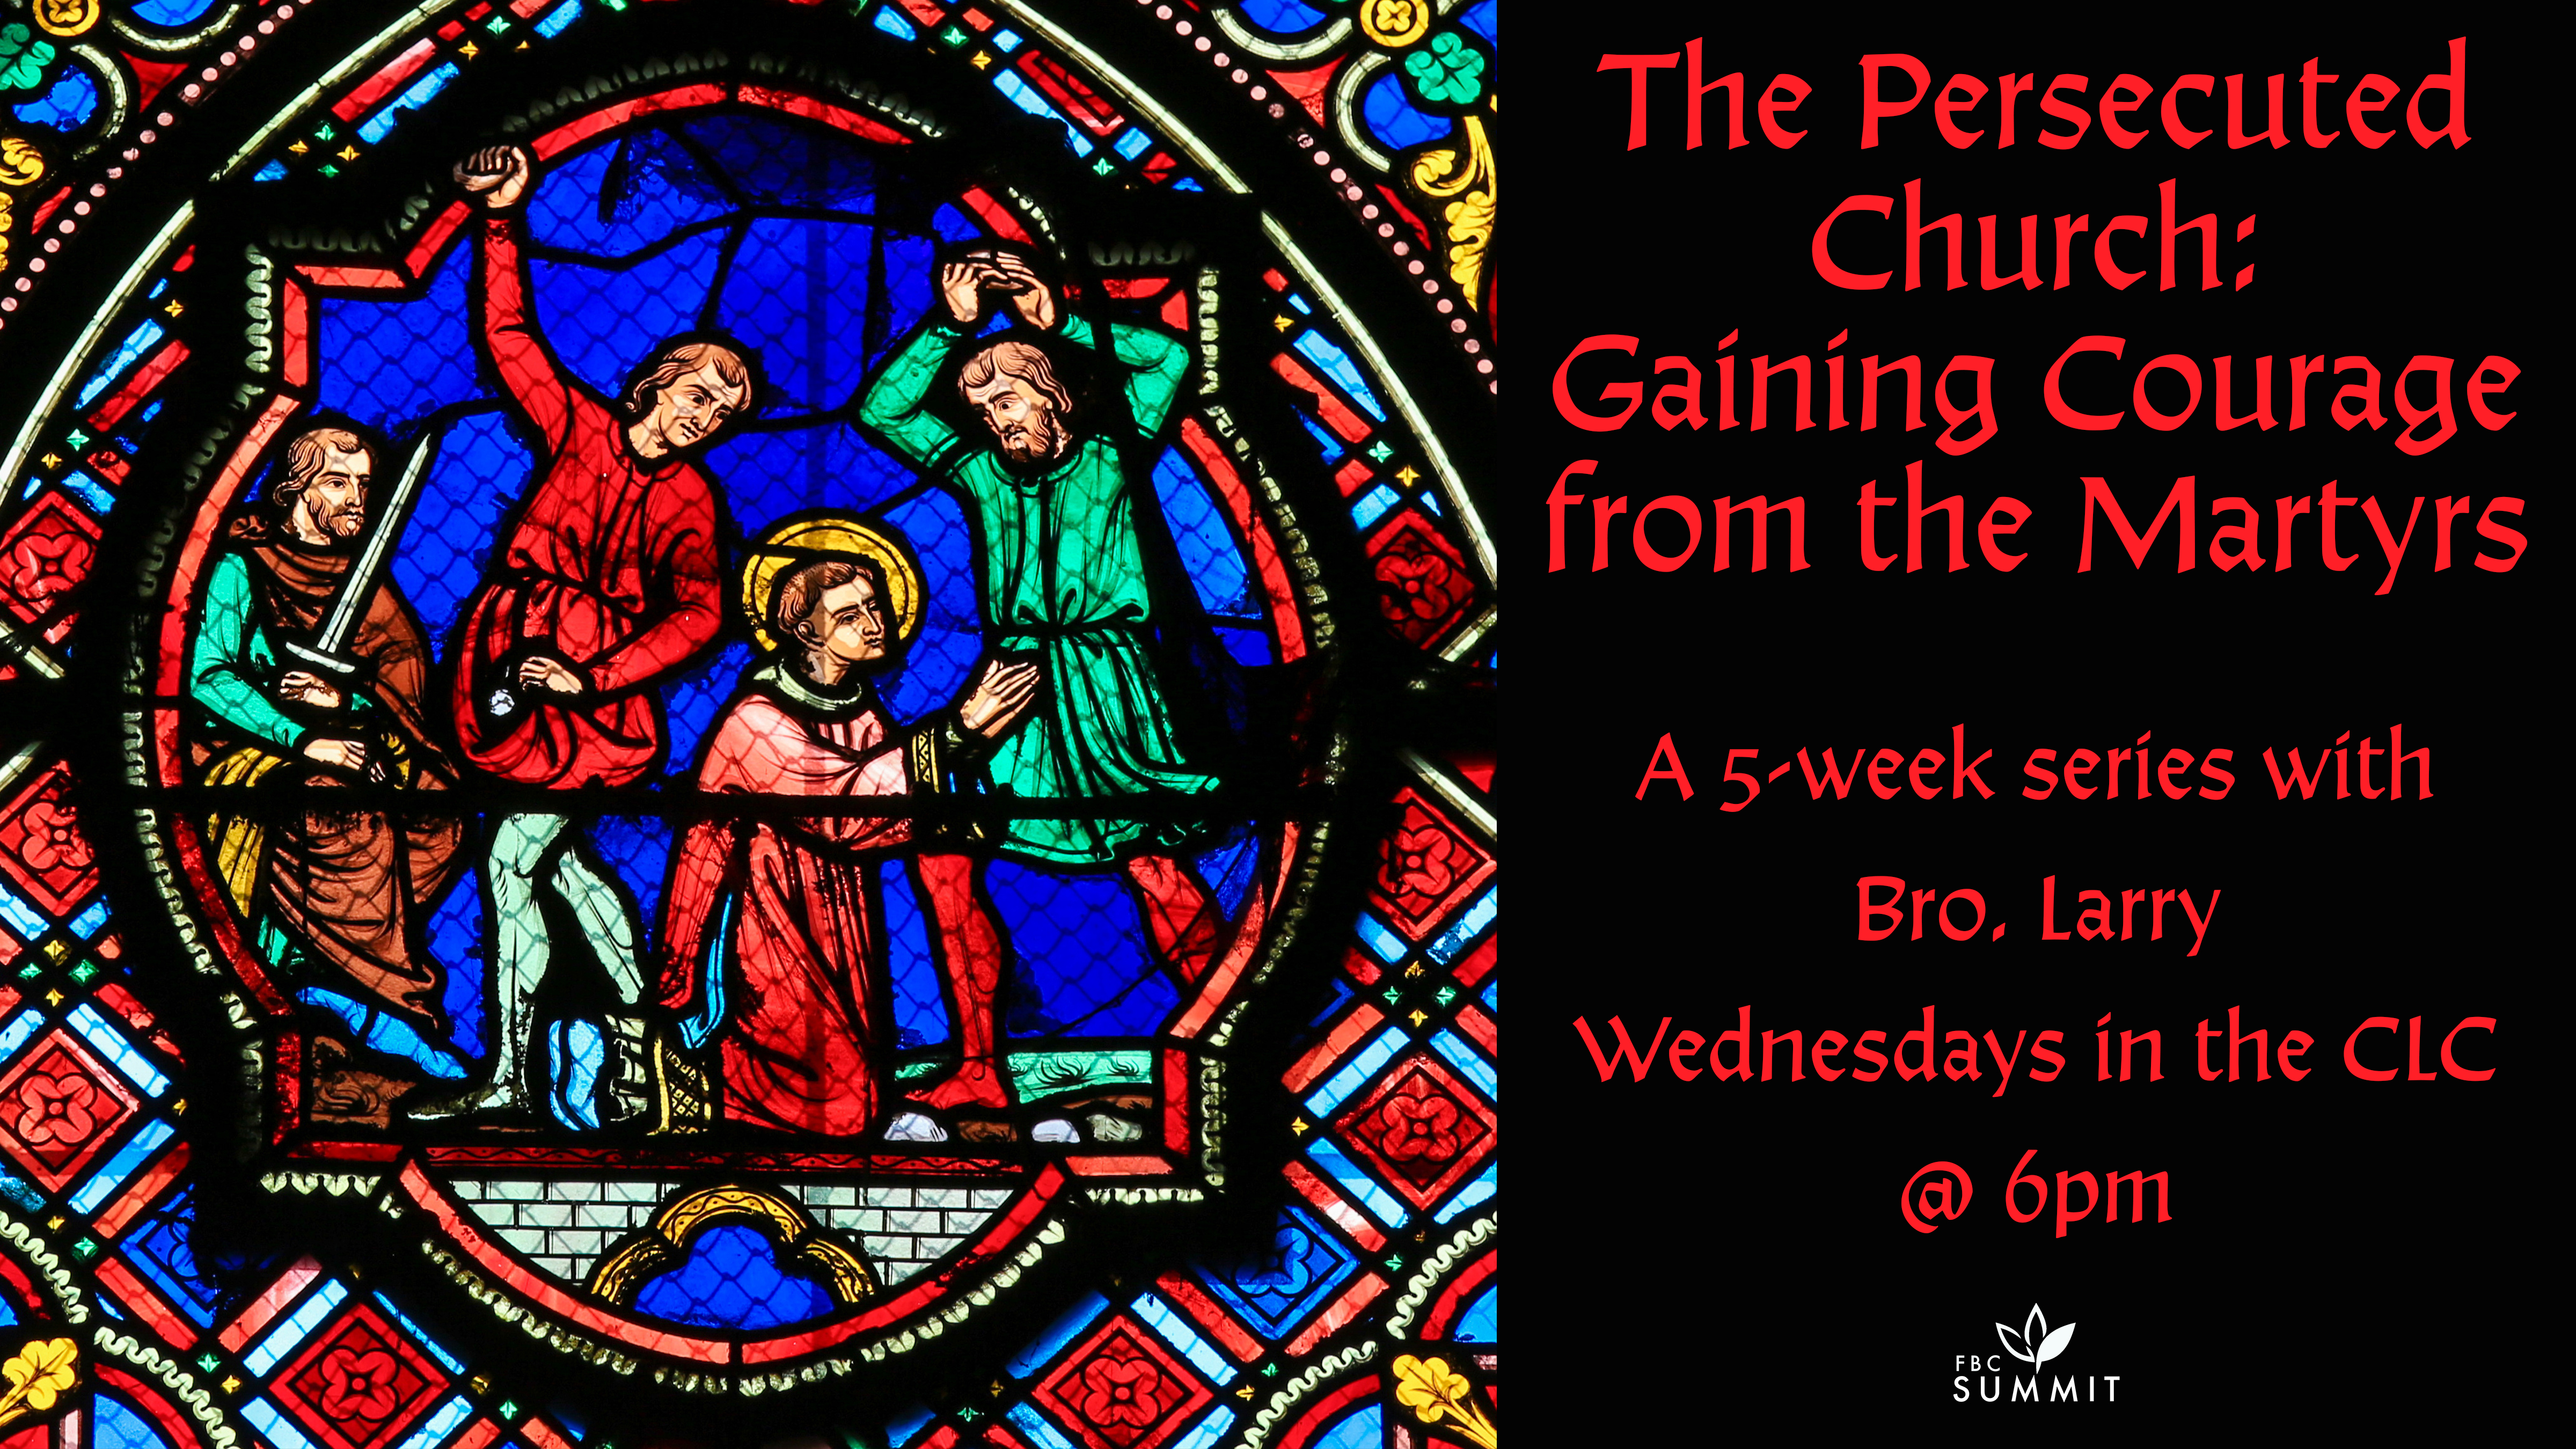 Wednesday Bible Study: "The Persecuted Church: Gathering Courage from the Martyrs, Part III" // Dr. Larry LeBlanc